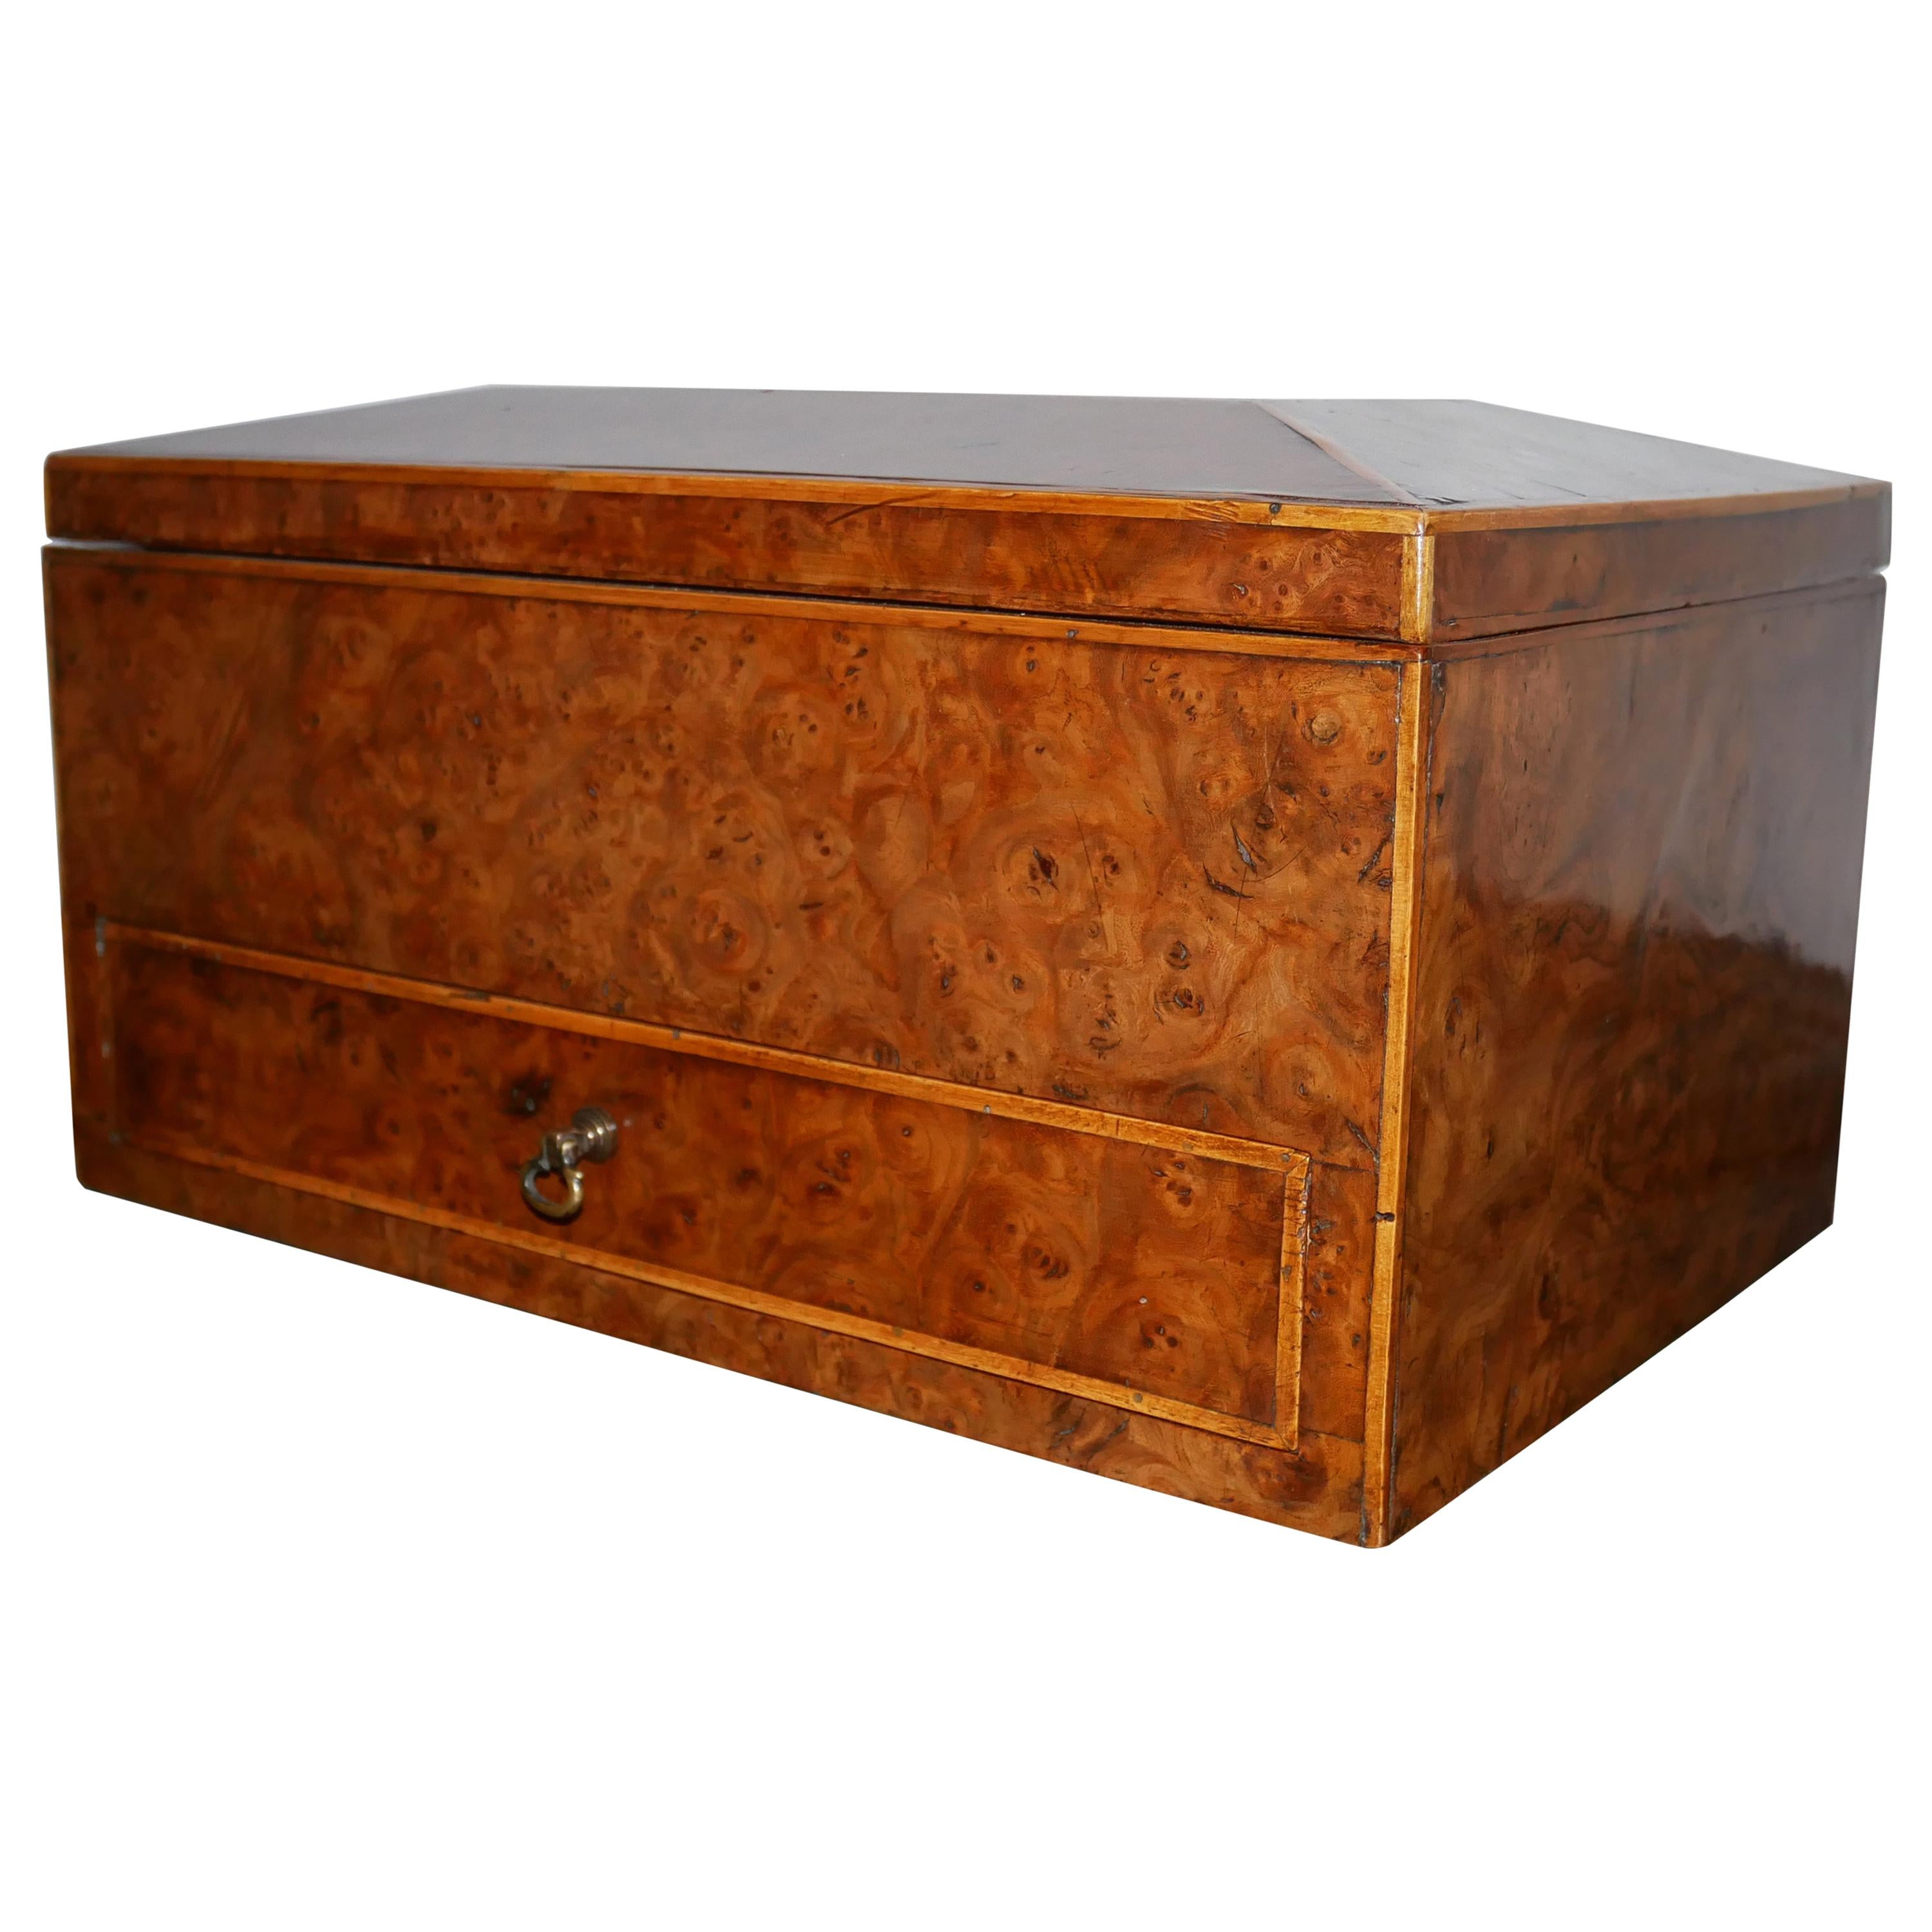 A large late Regency burr elm and boxwood strung work box, the sarcophagus shaped lift-off lid enclosing a void with removable borders, the drawer with a compartmentalized interior.